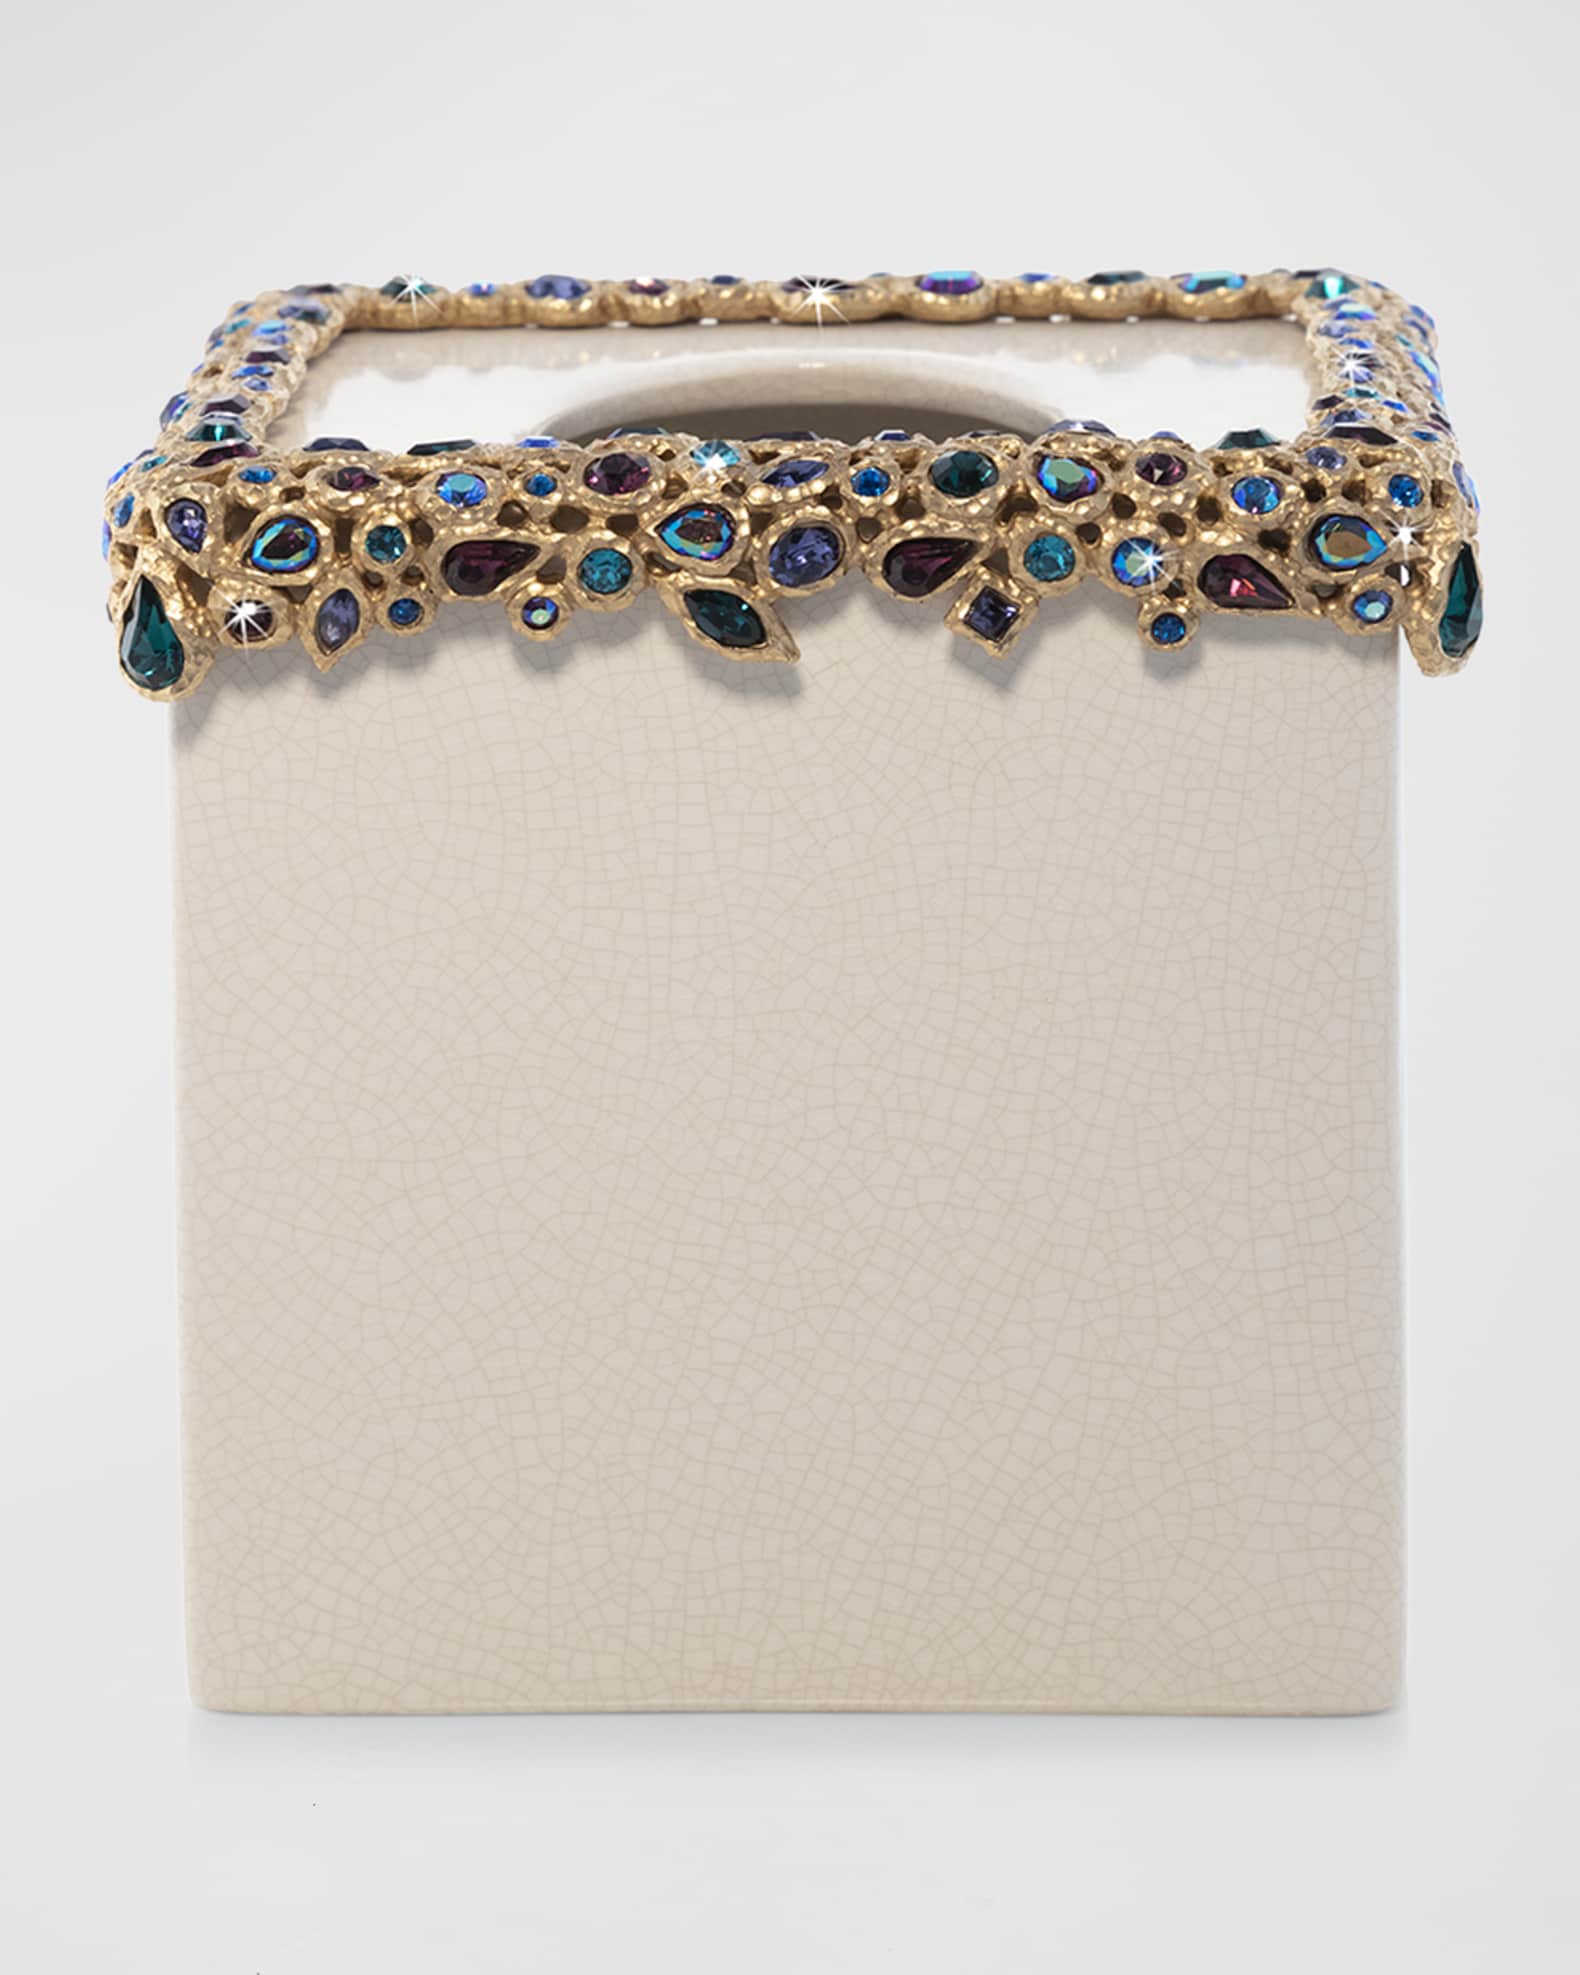 Bejeweled at Neiman Marcus